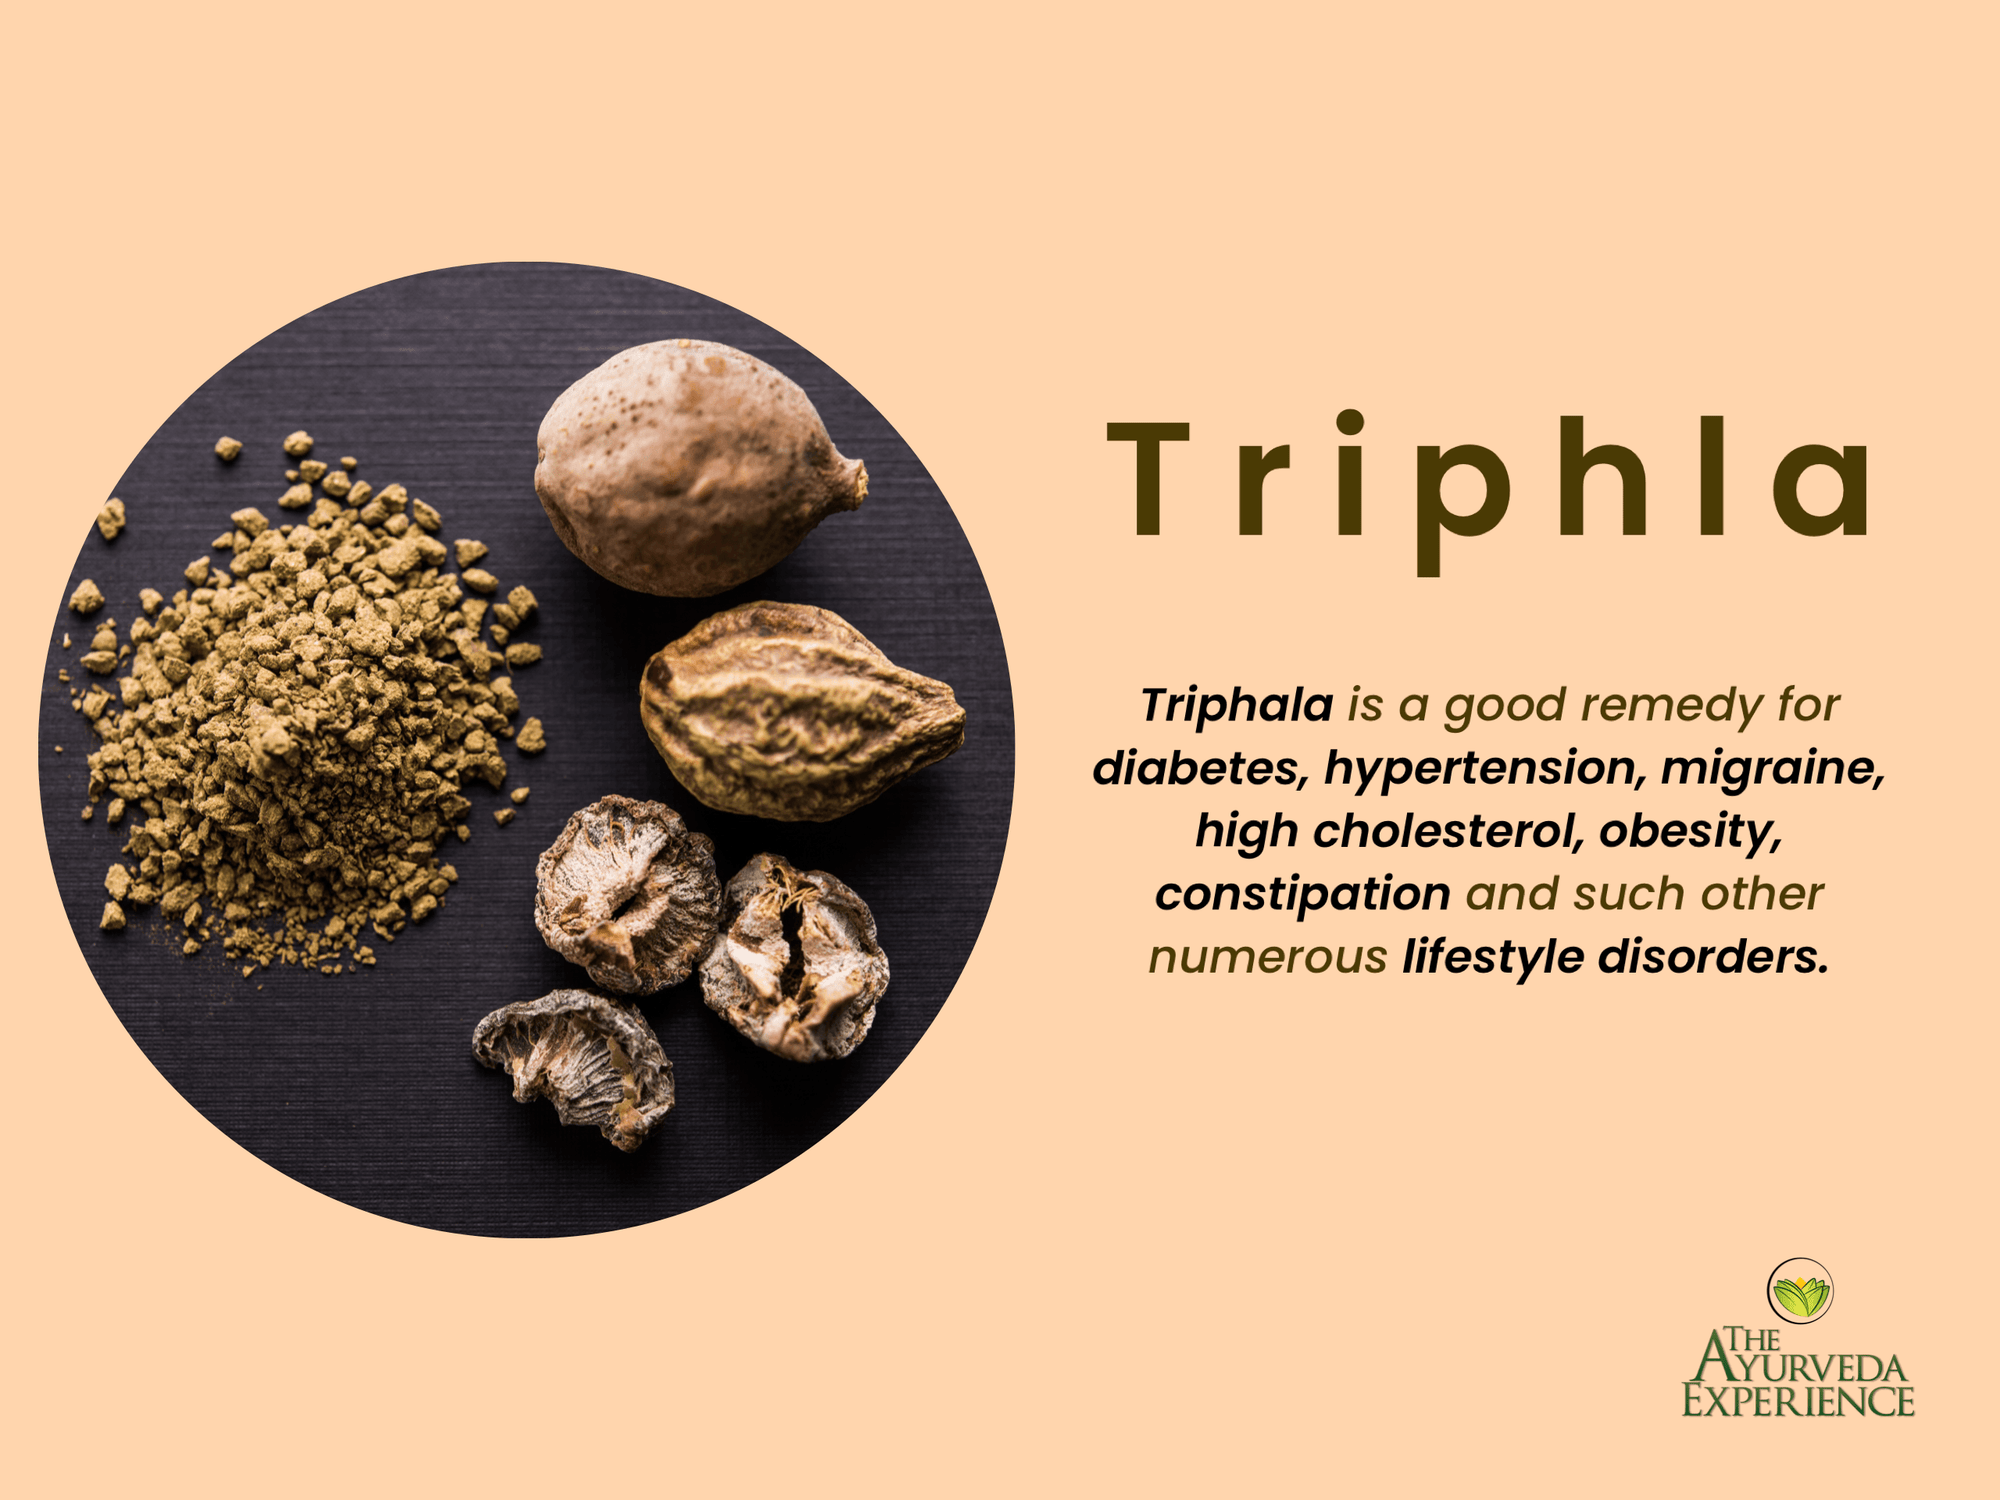 All you need about Triphala